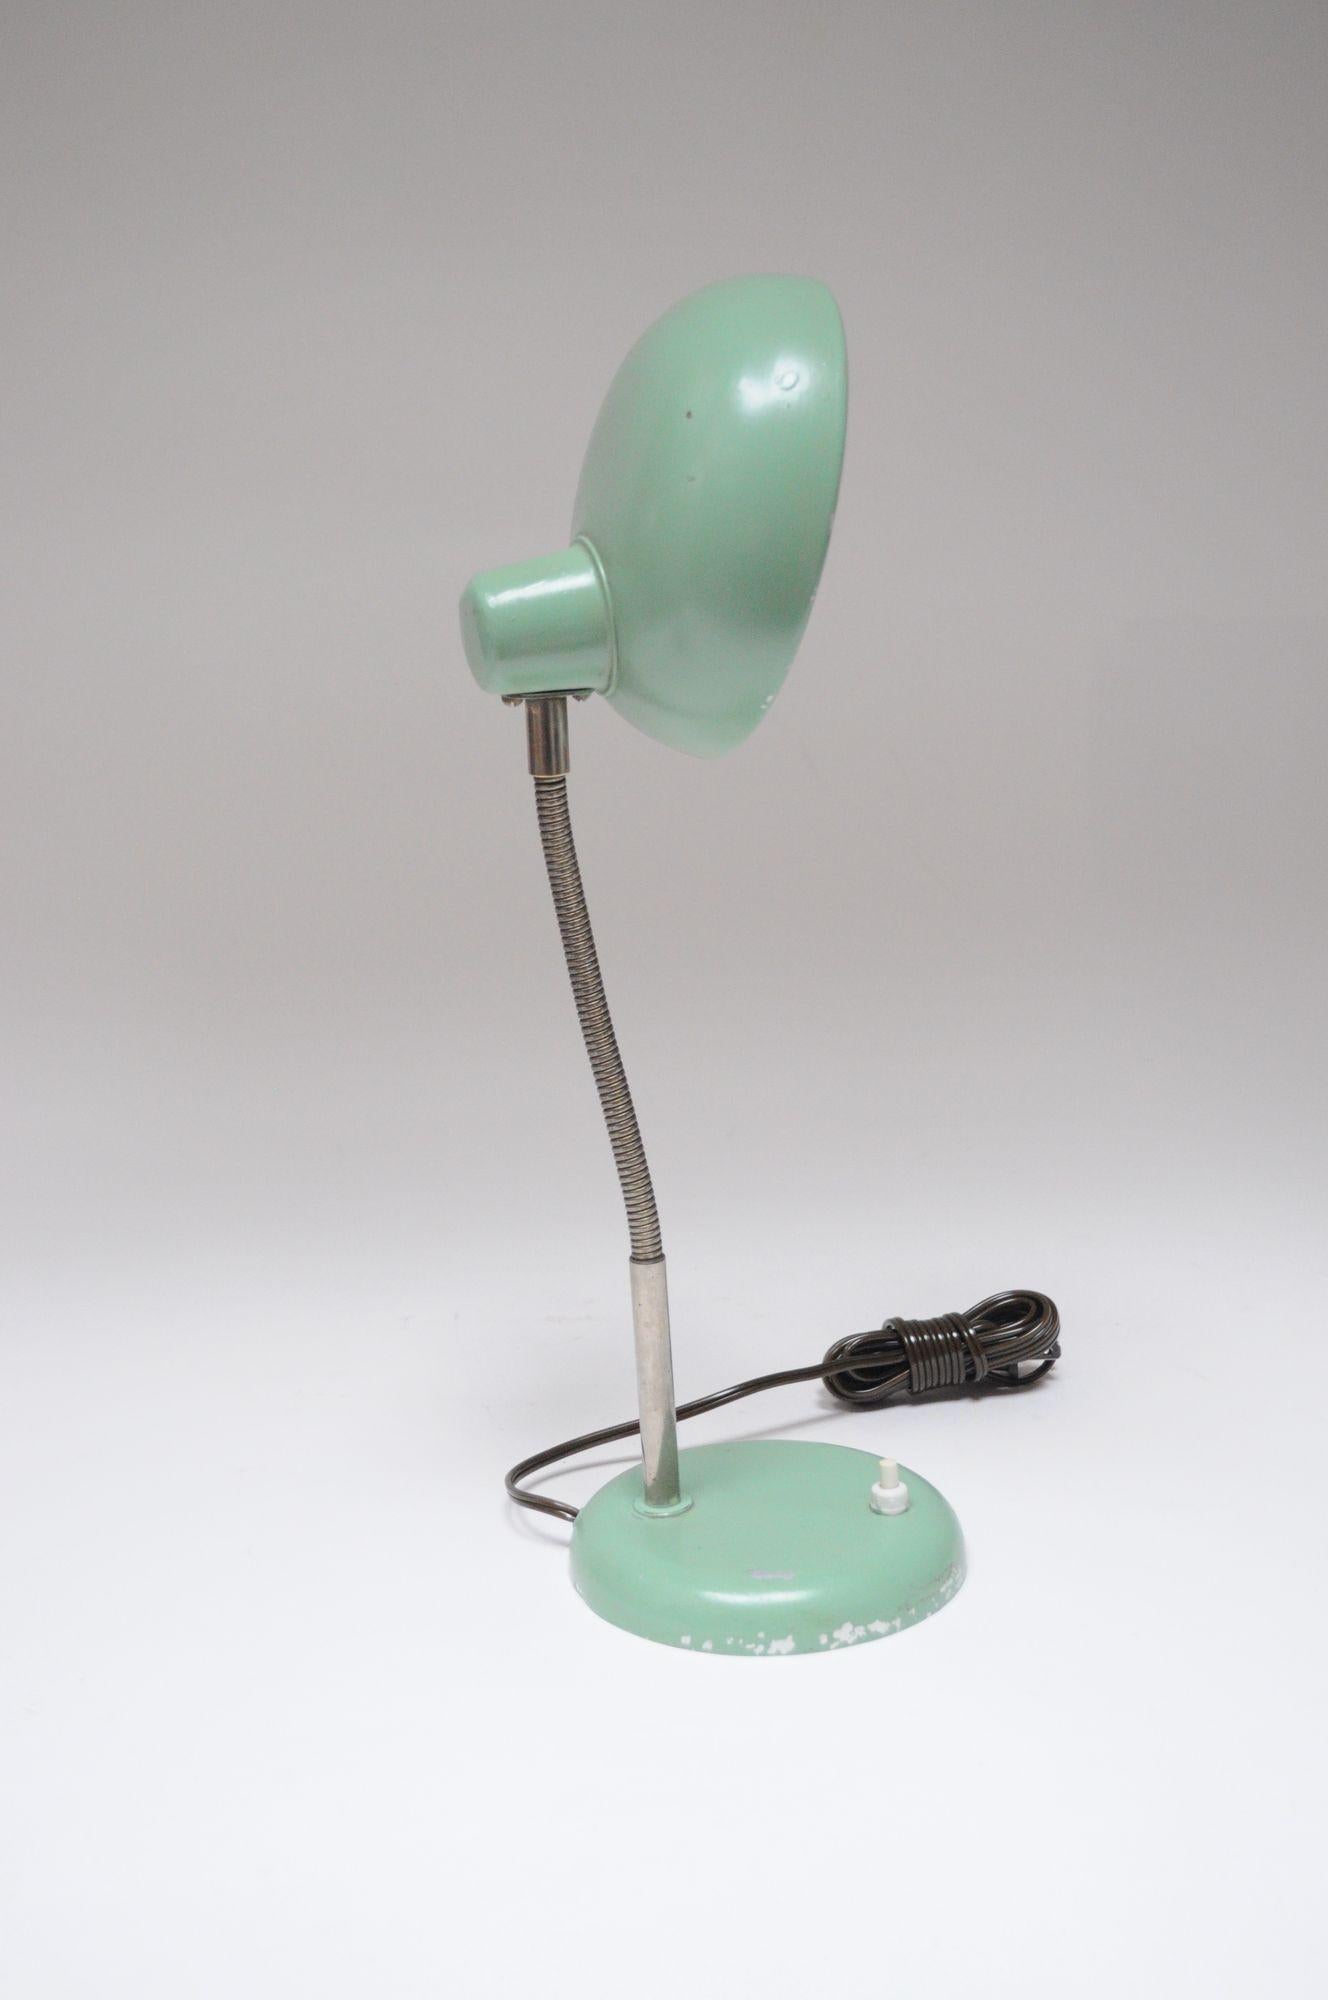 Mid-20th Century Industrial desk/table lamp in the style of Christian Dell (ca. 1950, Germany).
Petite form with gooseneck and adjustable shade.
Mint green paint is of the period, but not original, evidenced by its thick, uneven application